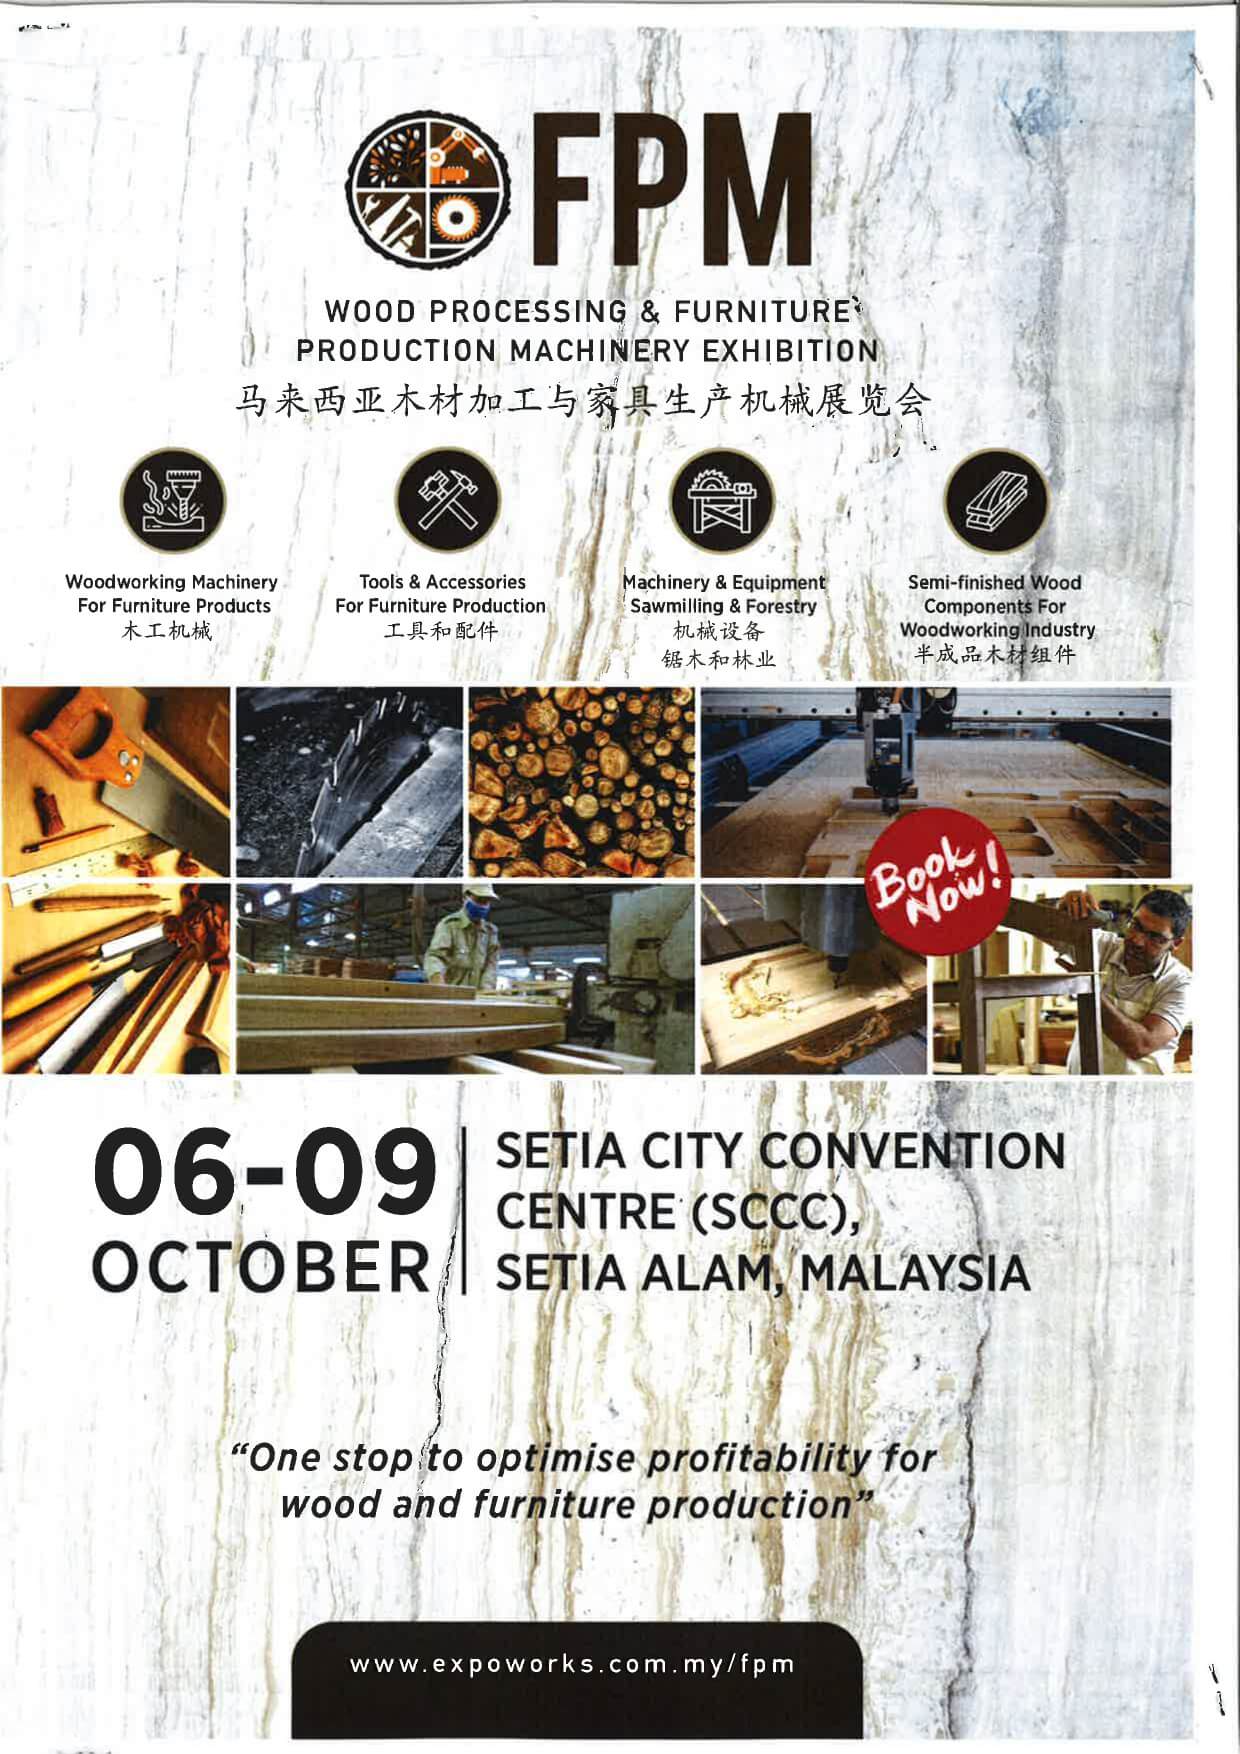 Wood Processing & Furniture Production Machinery Exhibition